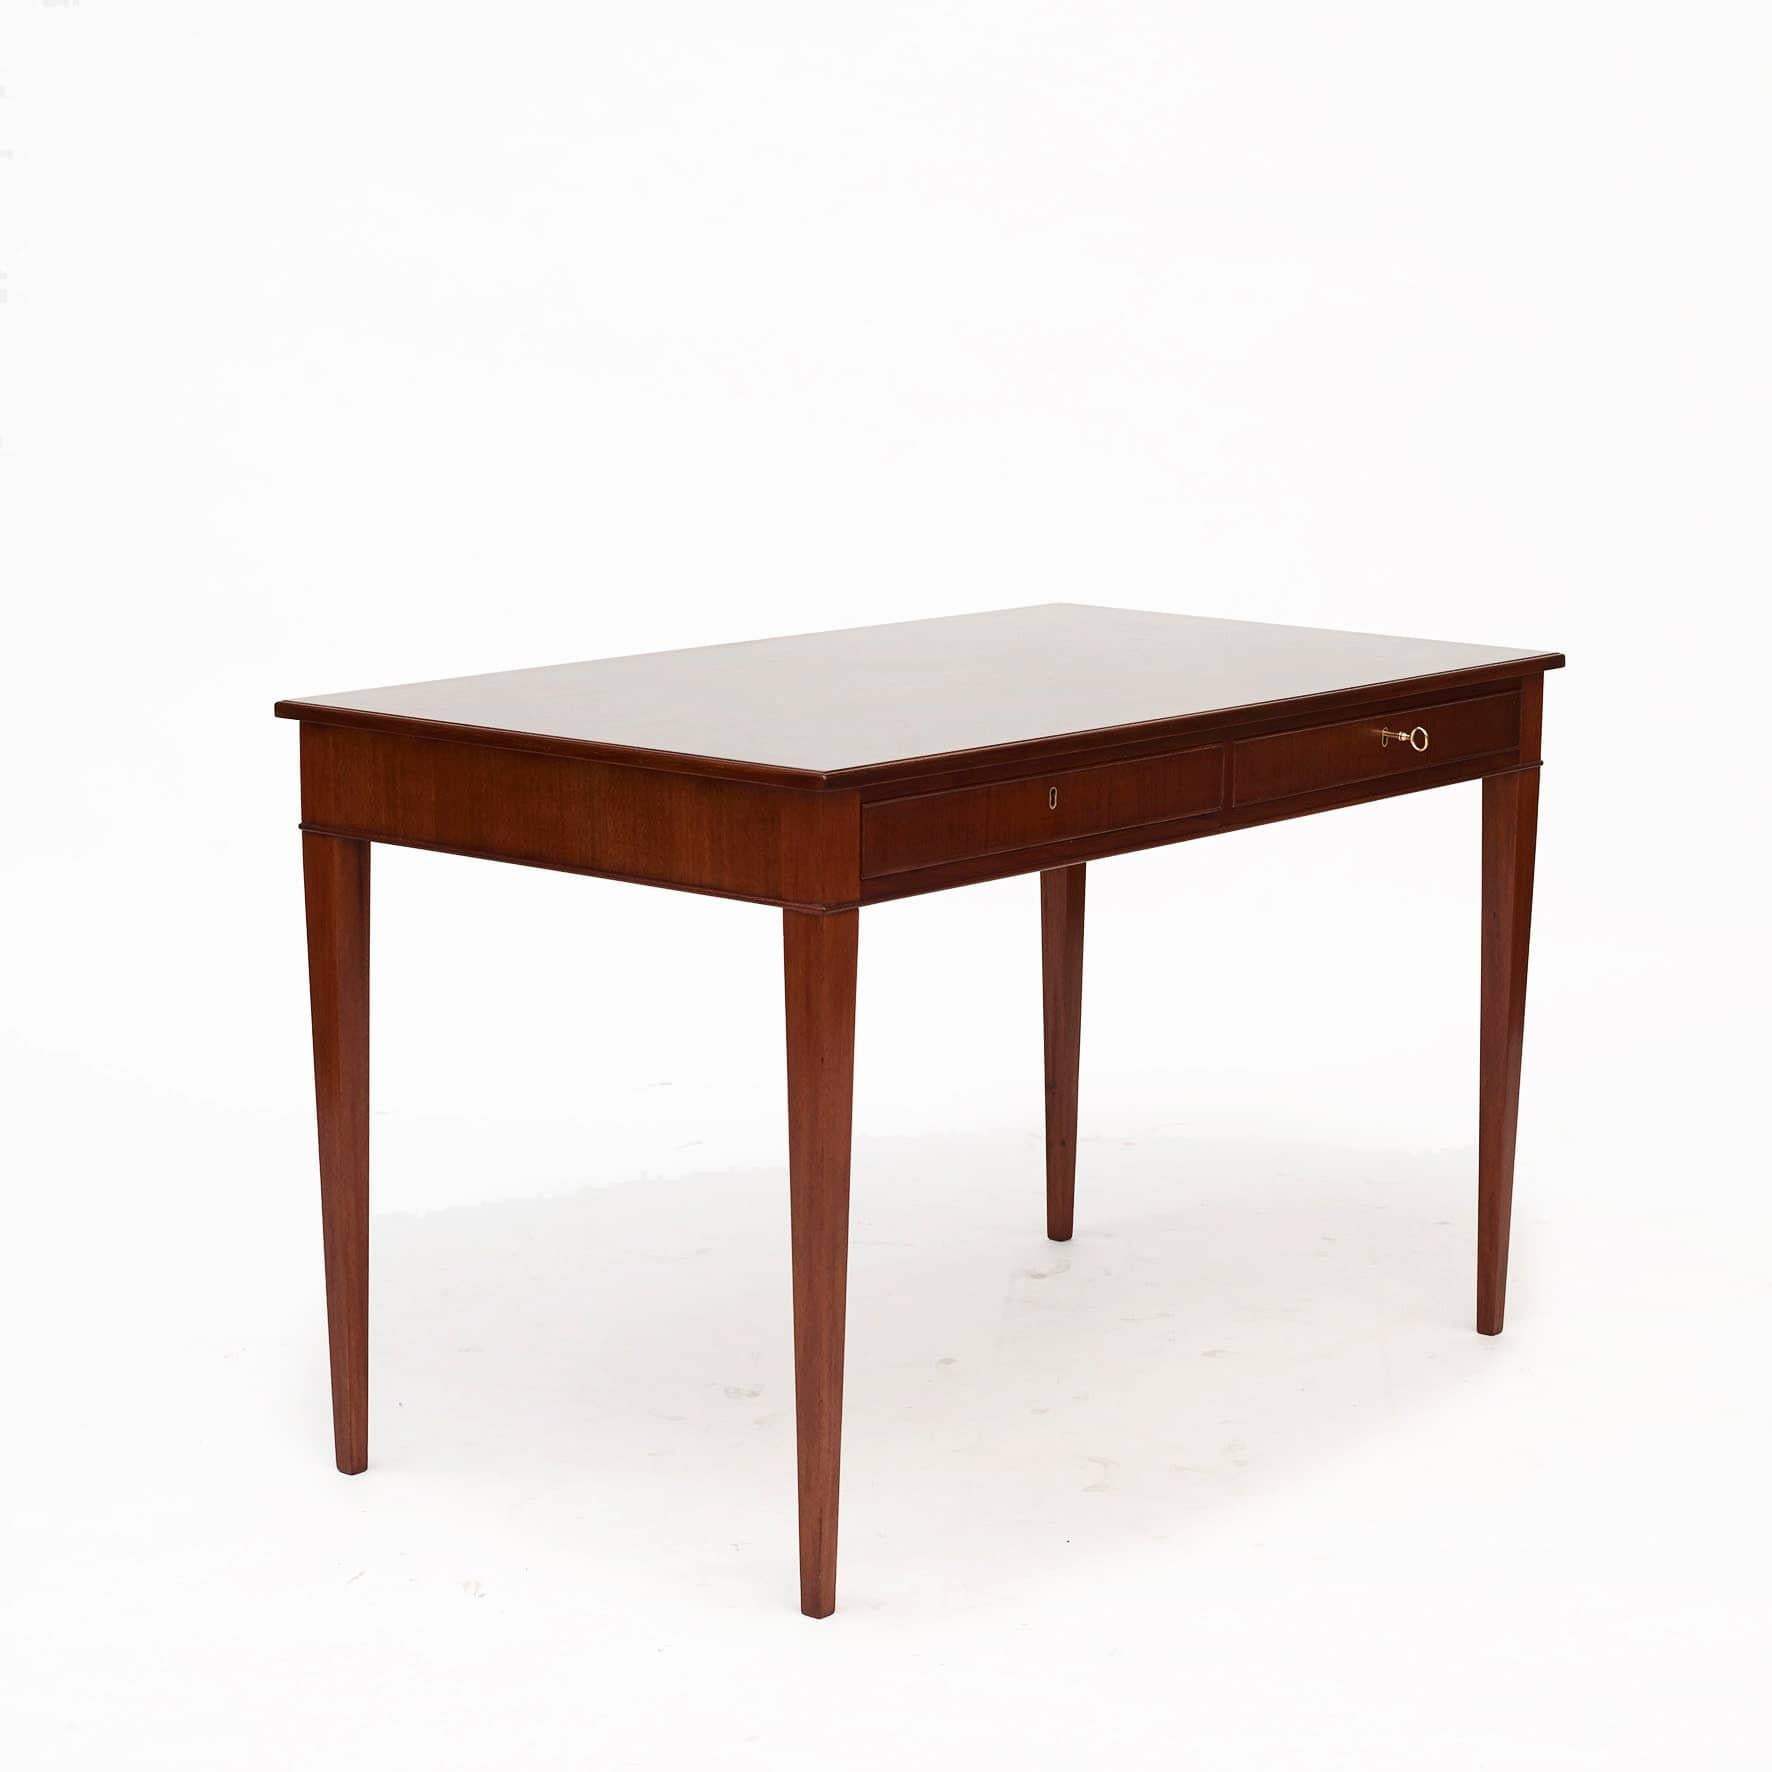 Frits Henningsen, Danish furniture designer and cabinet maker (1889-1965).
Elegant solid mahogany writing table.
Rectangular top with with molded edge above drawers, raised on elegant square tapered legs.

Height to apron: 60,5 centimeter

Classic